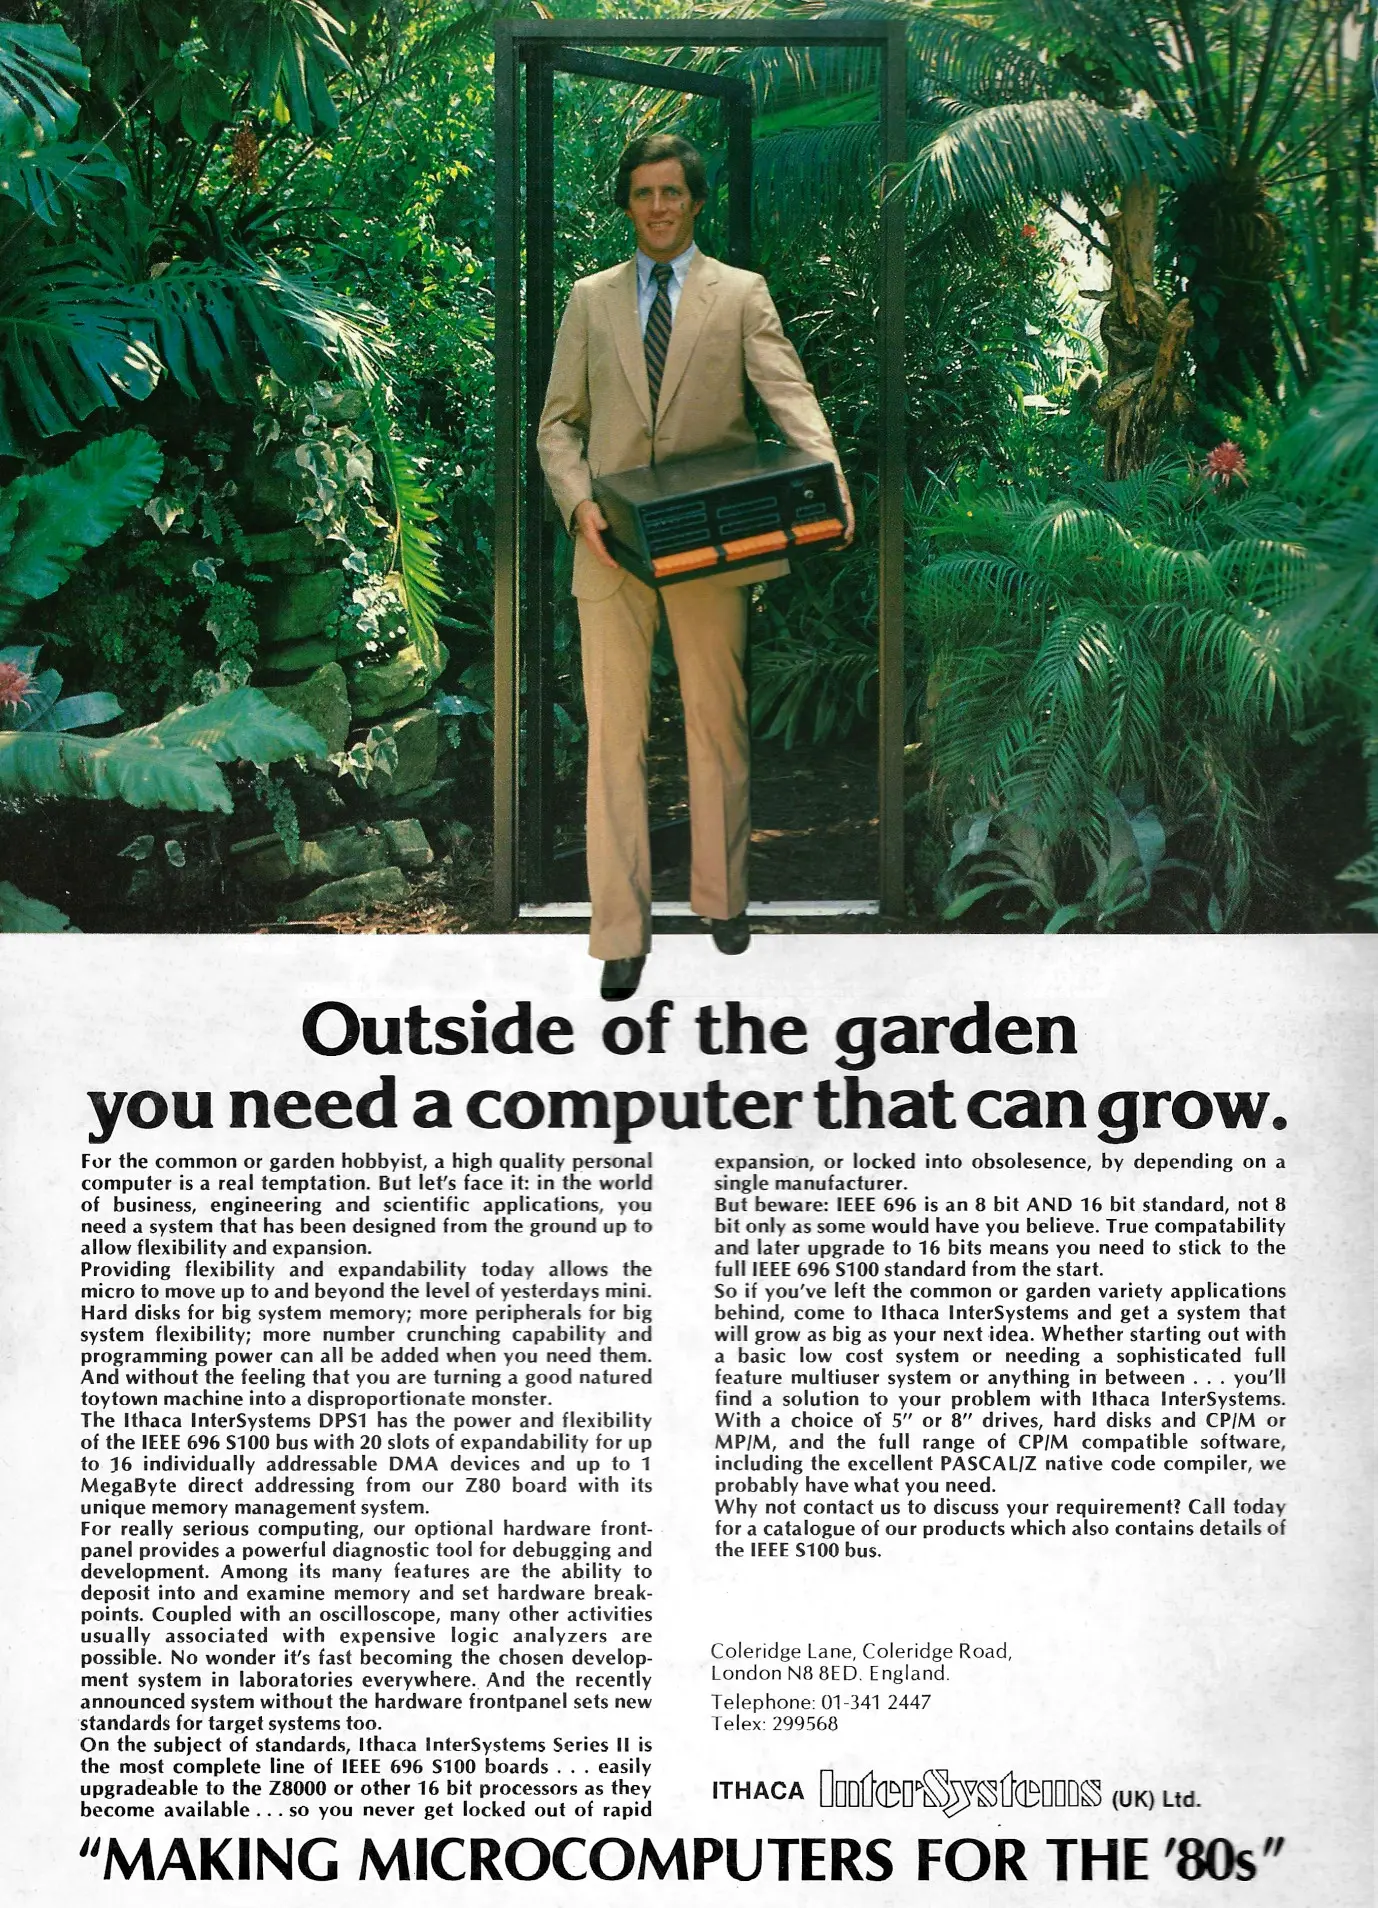 Ithaca Advert: Outside of the garden you need a computer that can grow - Ithaca InterSystems DPS1, from Personal Computer World, June 1981